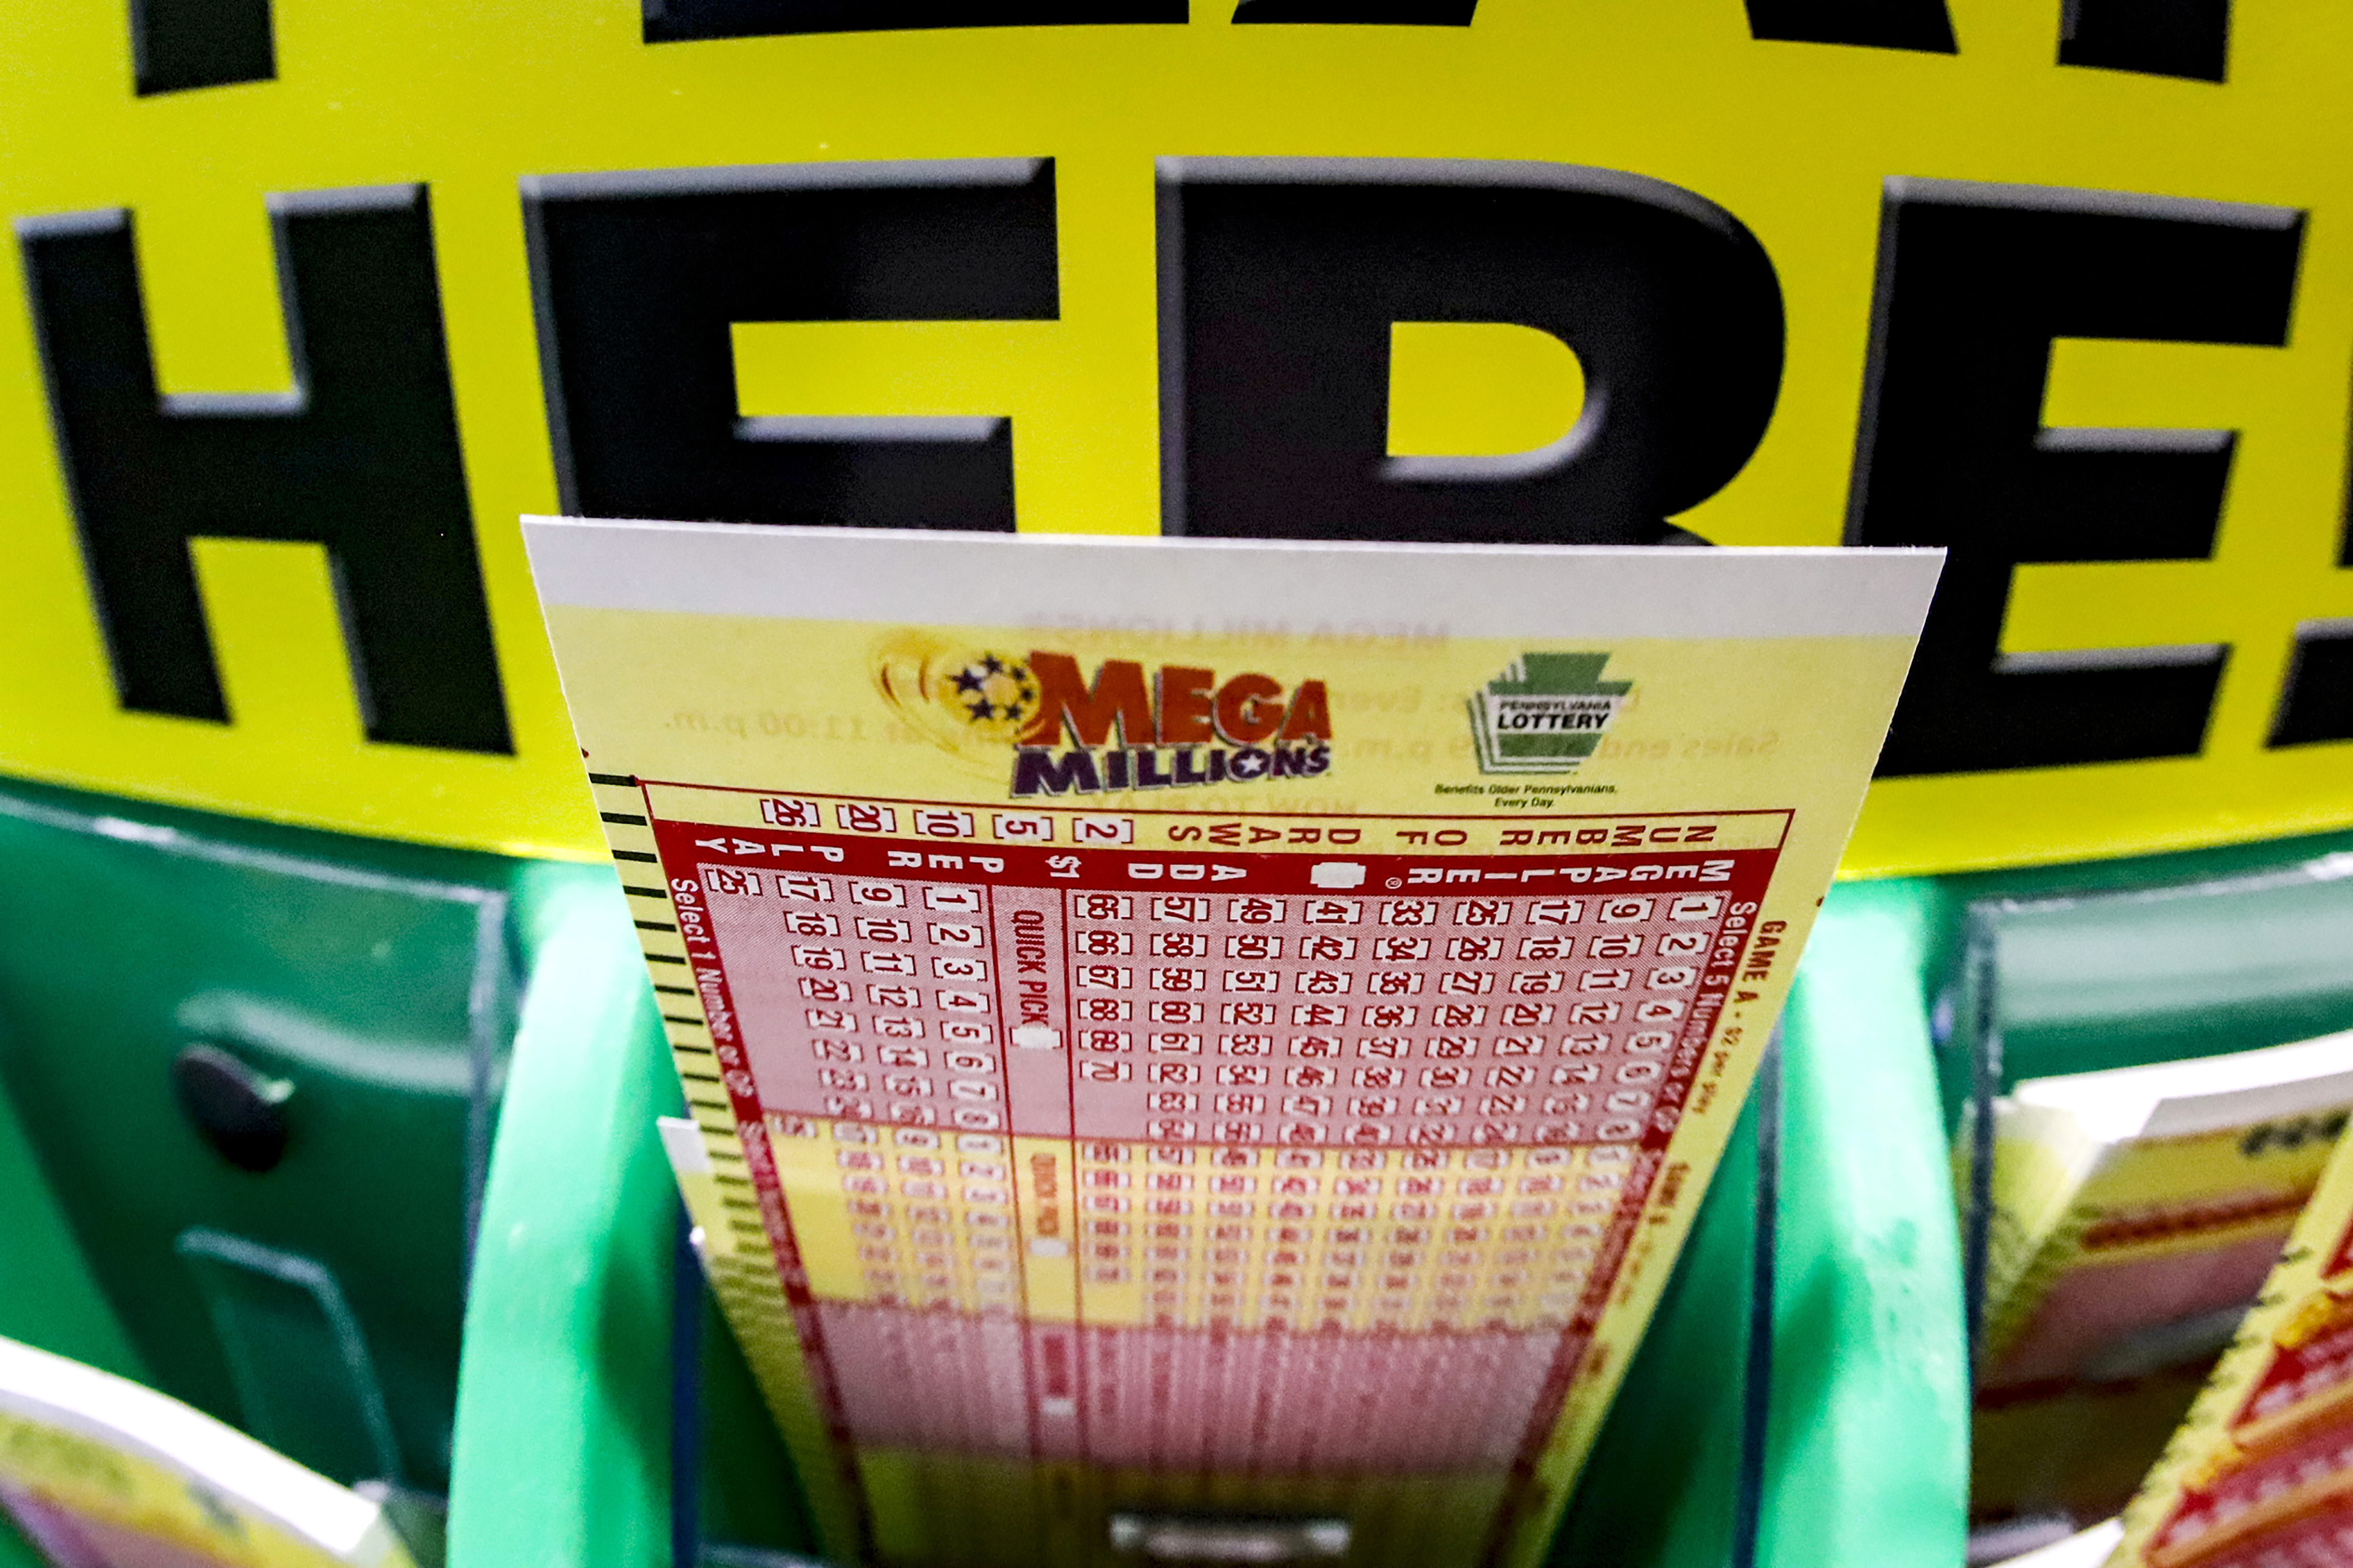 Powerball jackpot: New year kicks off with $810 million prize on the line